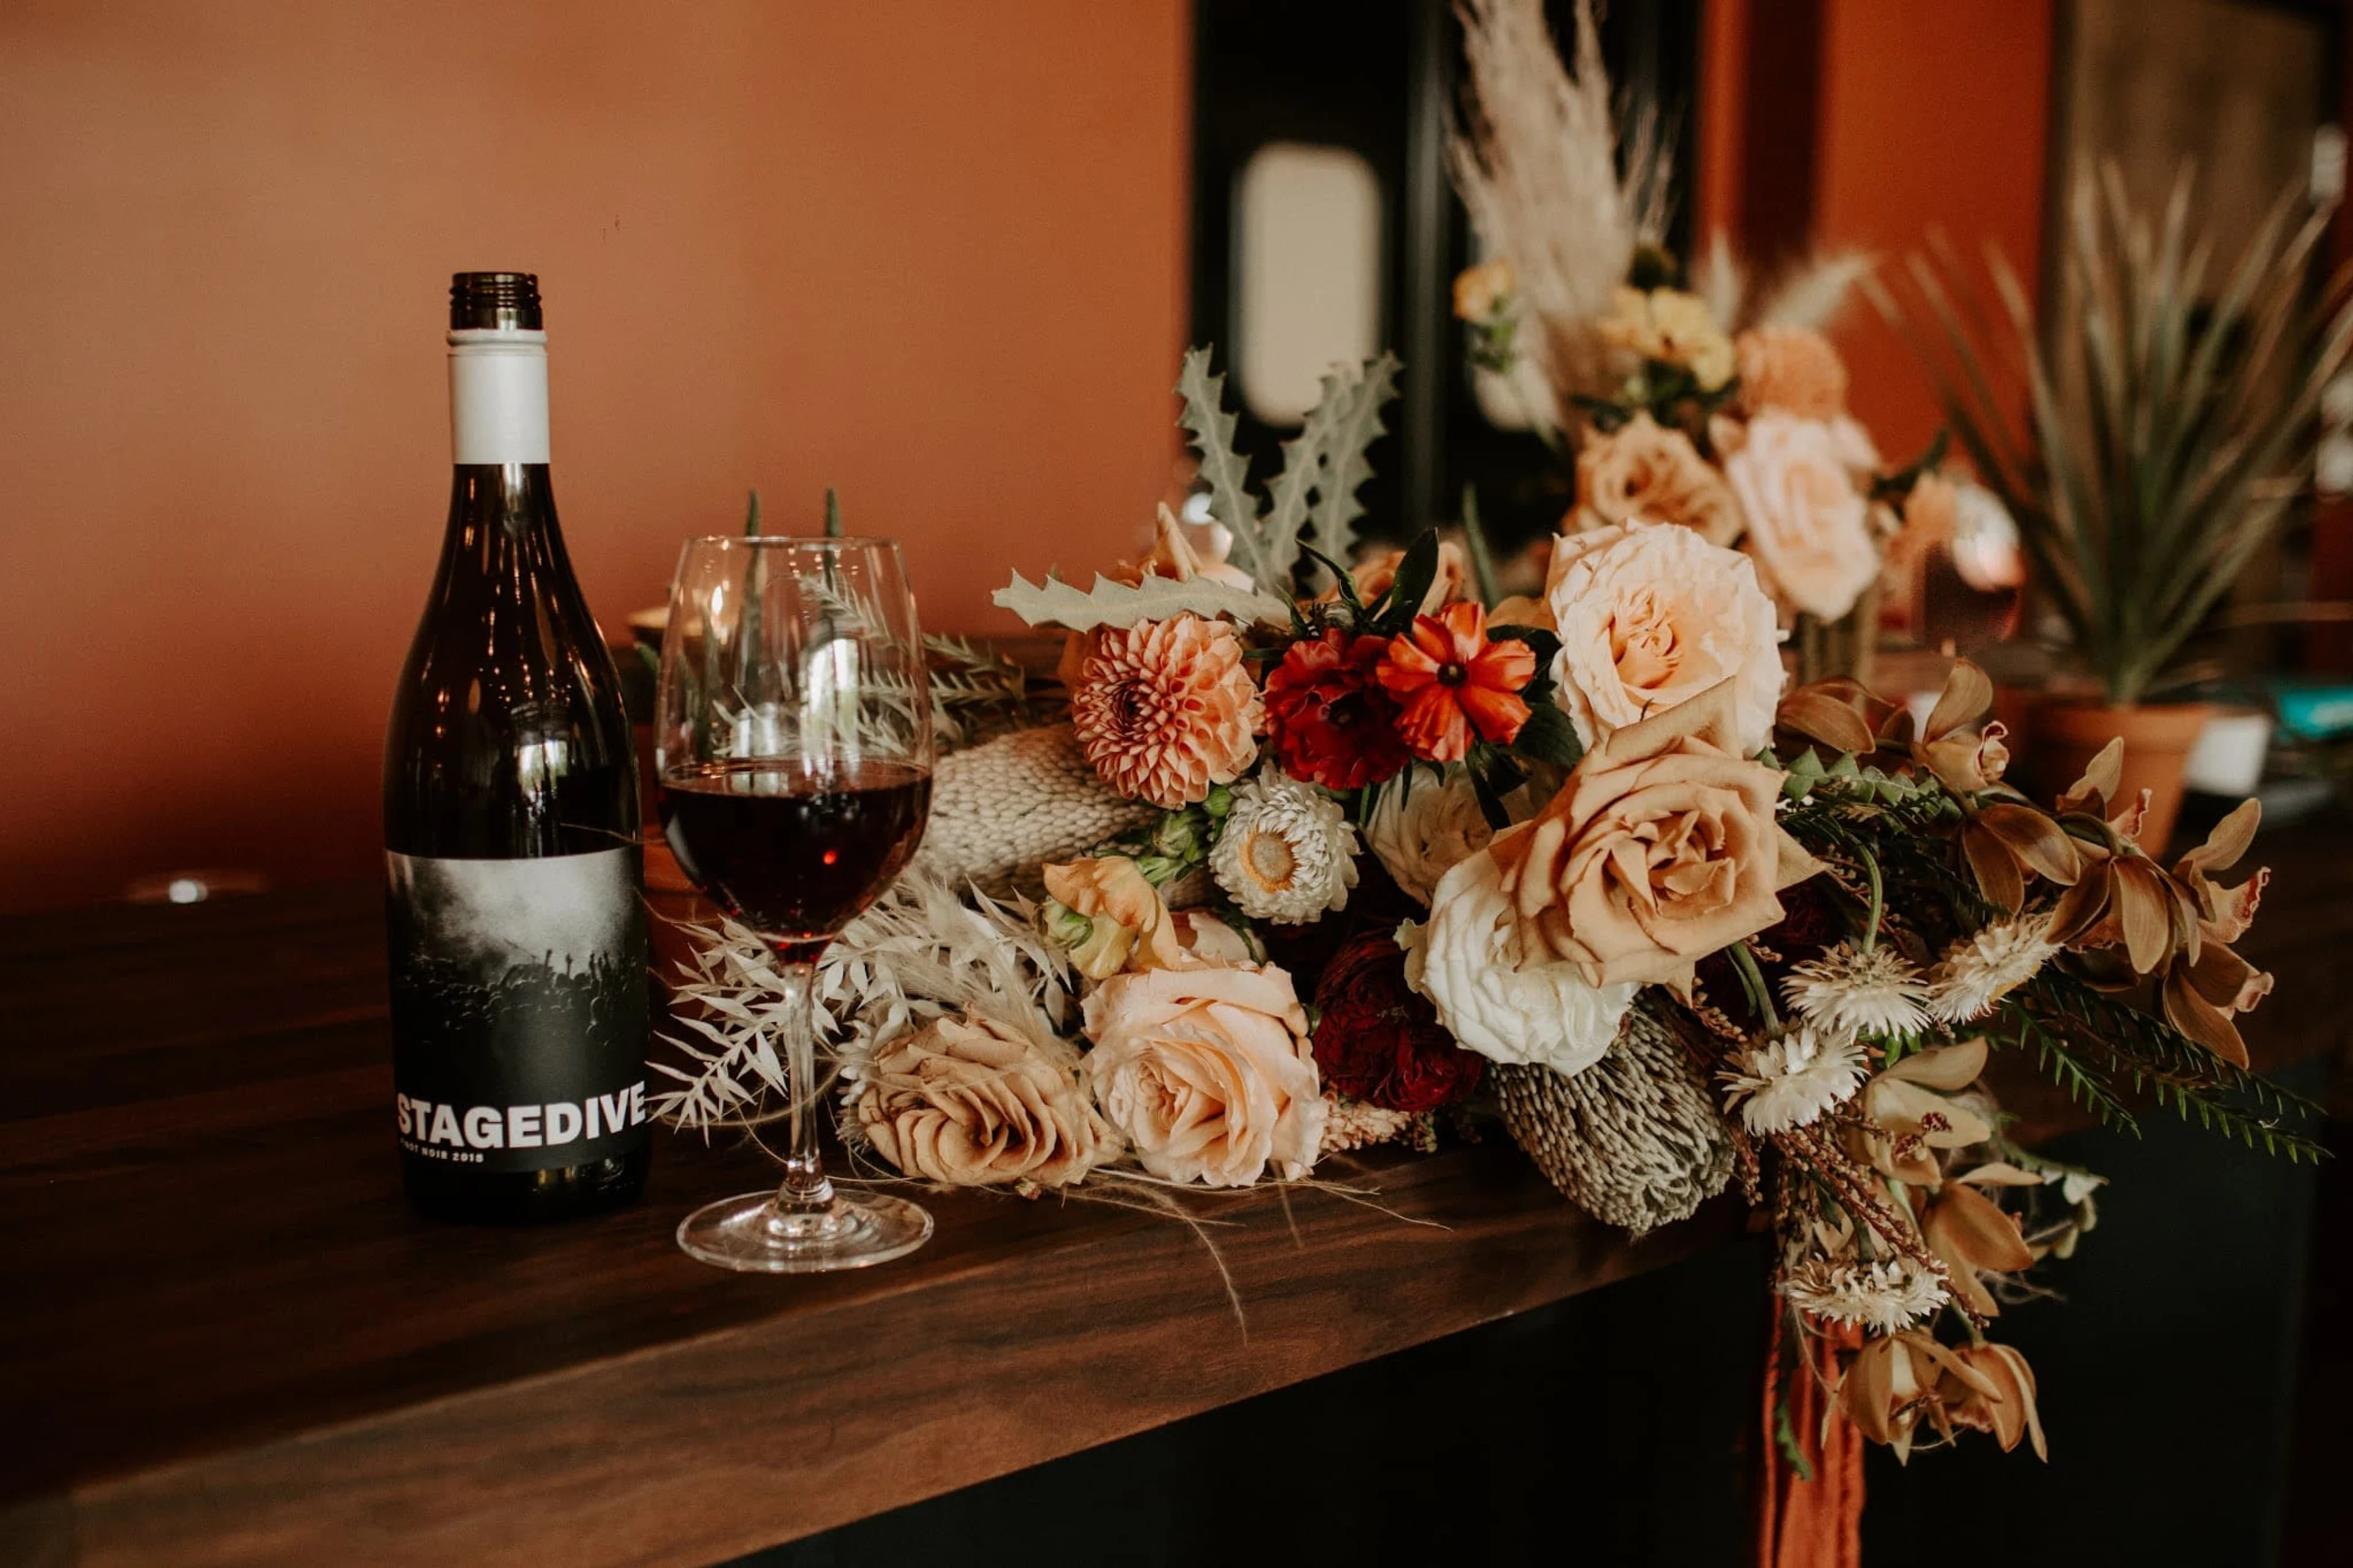 A wooden table with flowers and a glass and bottle of wine